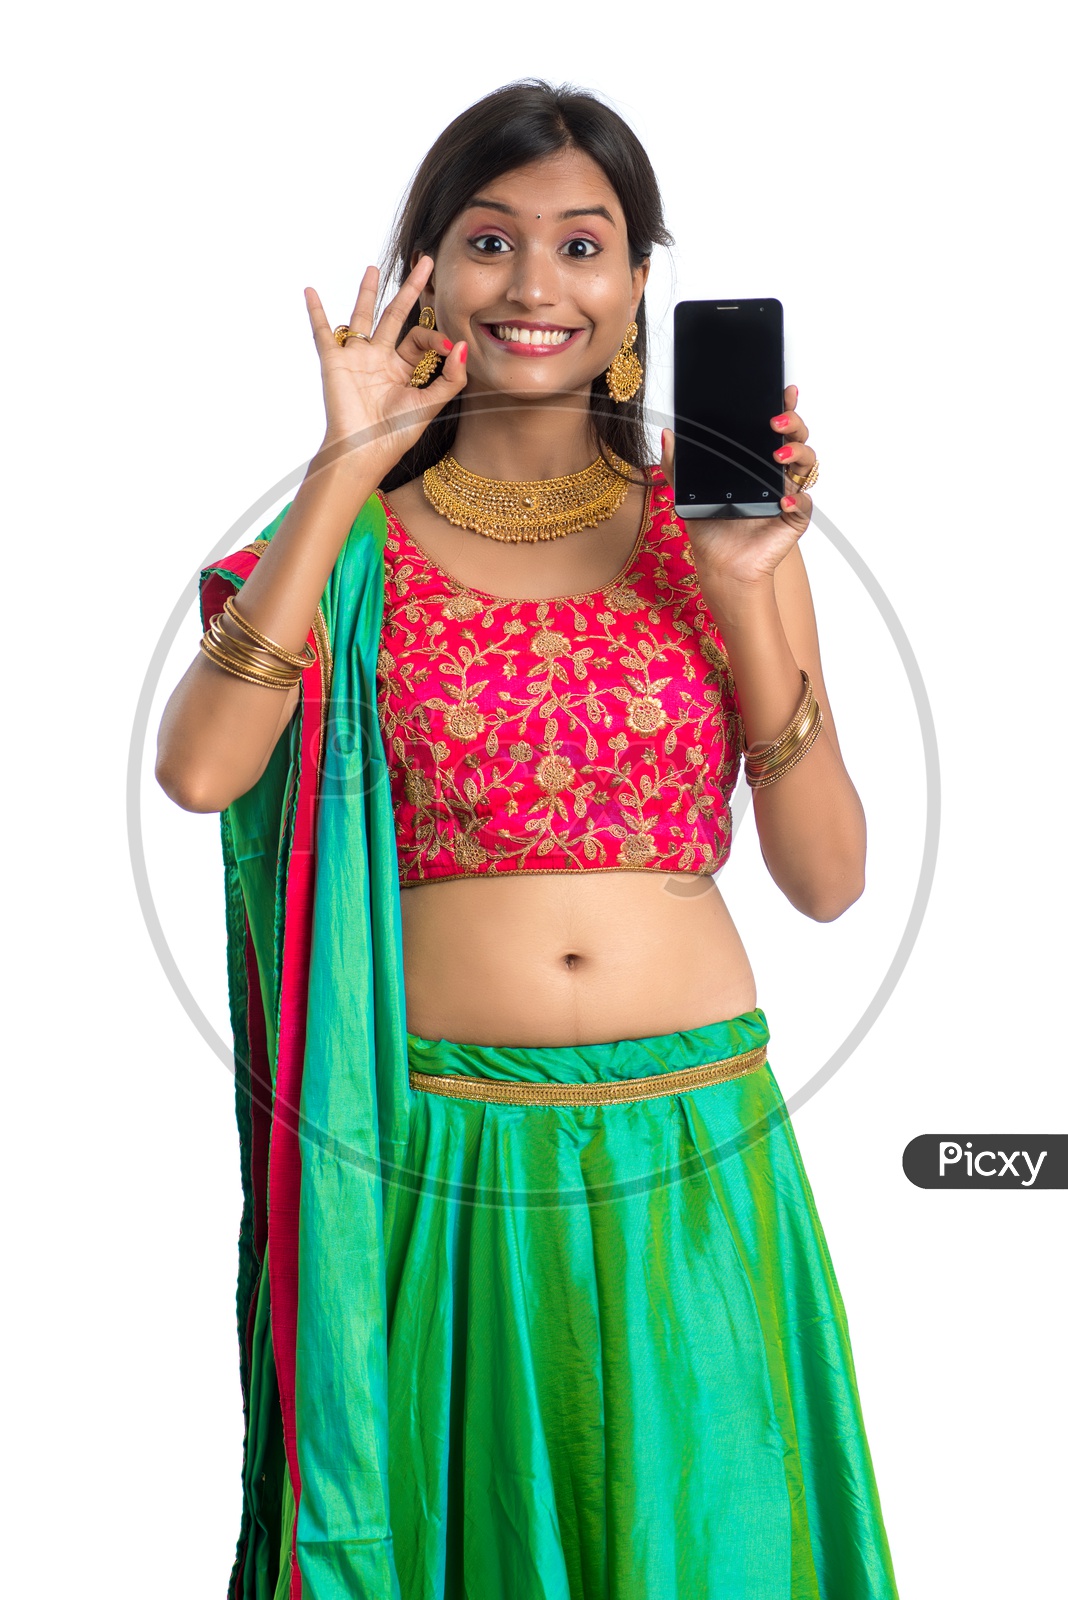 Portrait Of a Young  Traditional Indian  Woman  Showing Smart Phone Screen and  With an Expression an d a Gesture Over a White Background